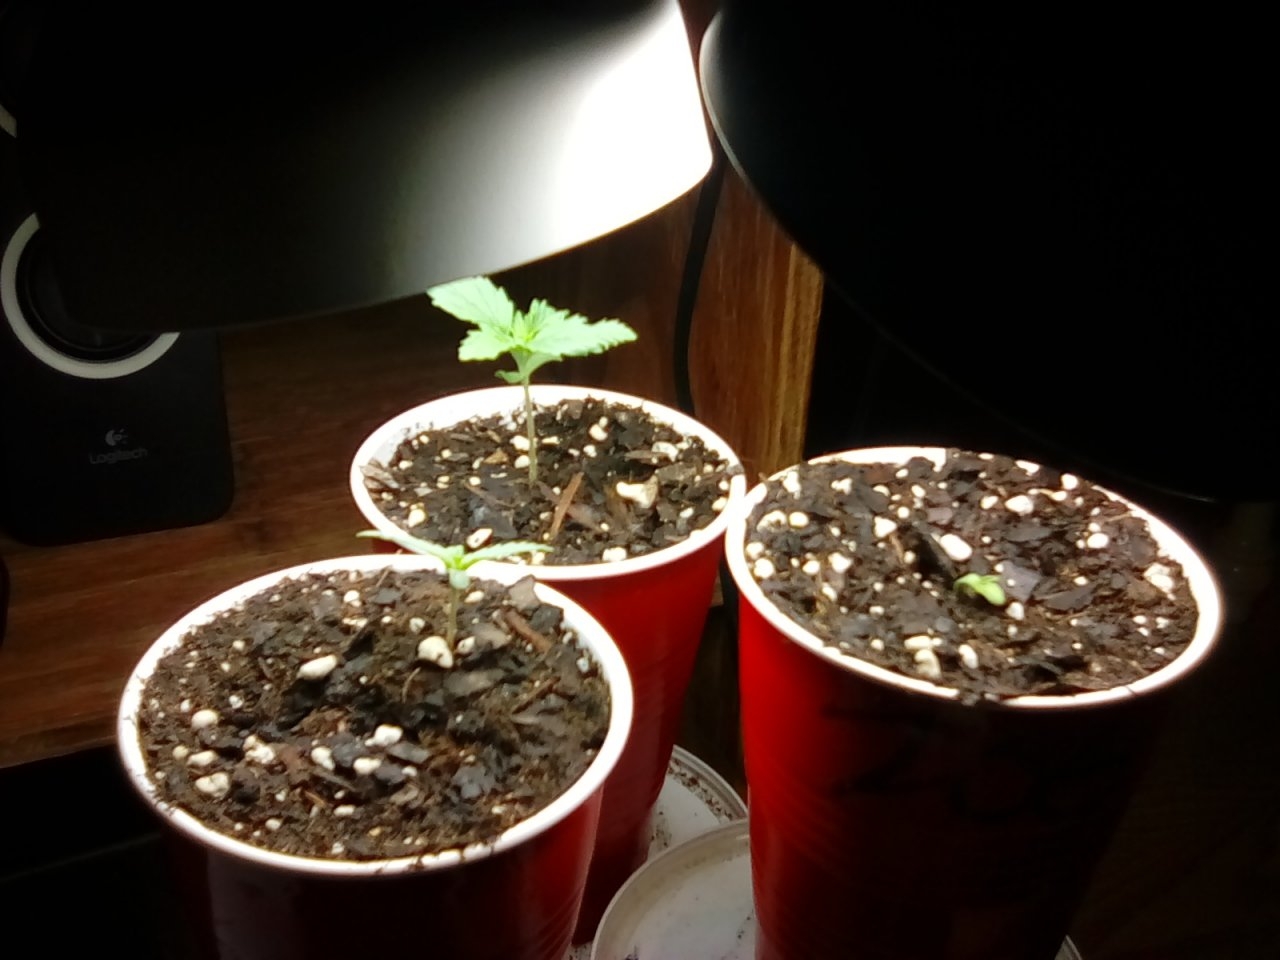 CFL lighting inches away from seedlings